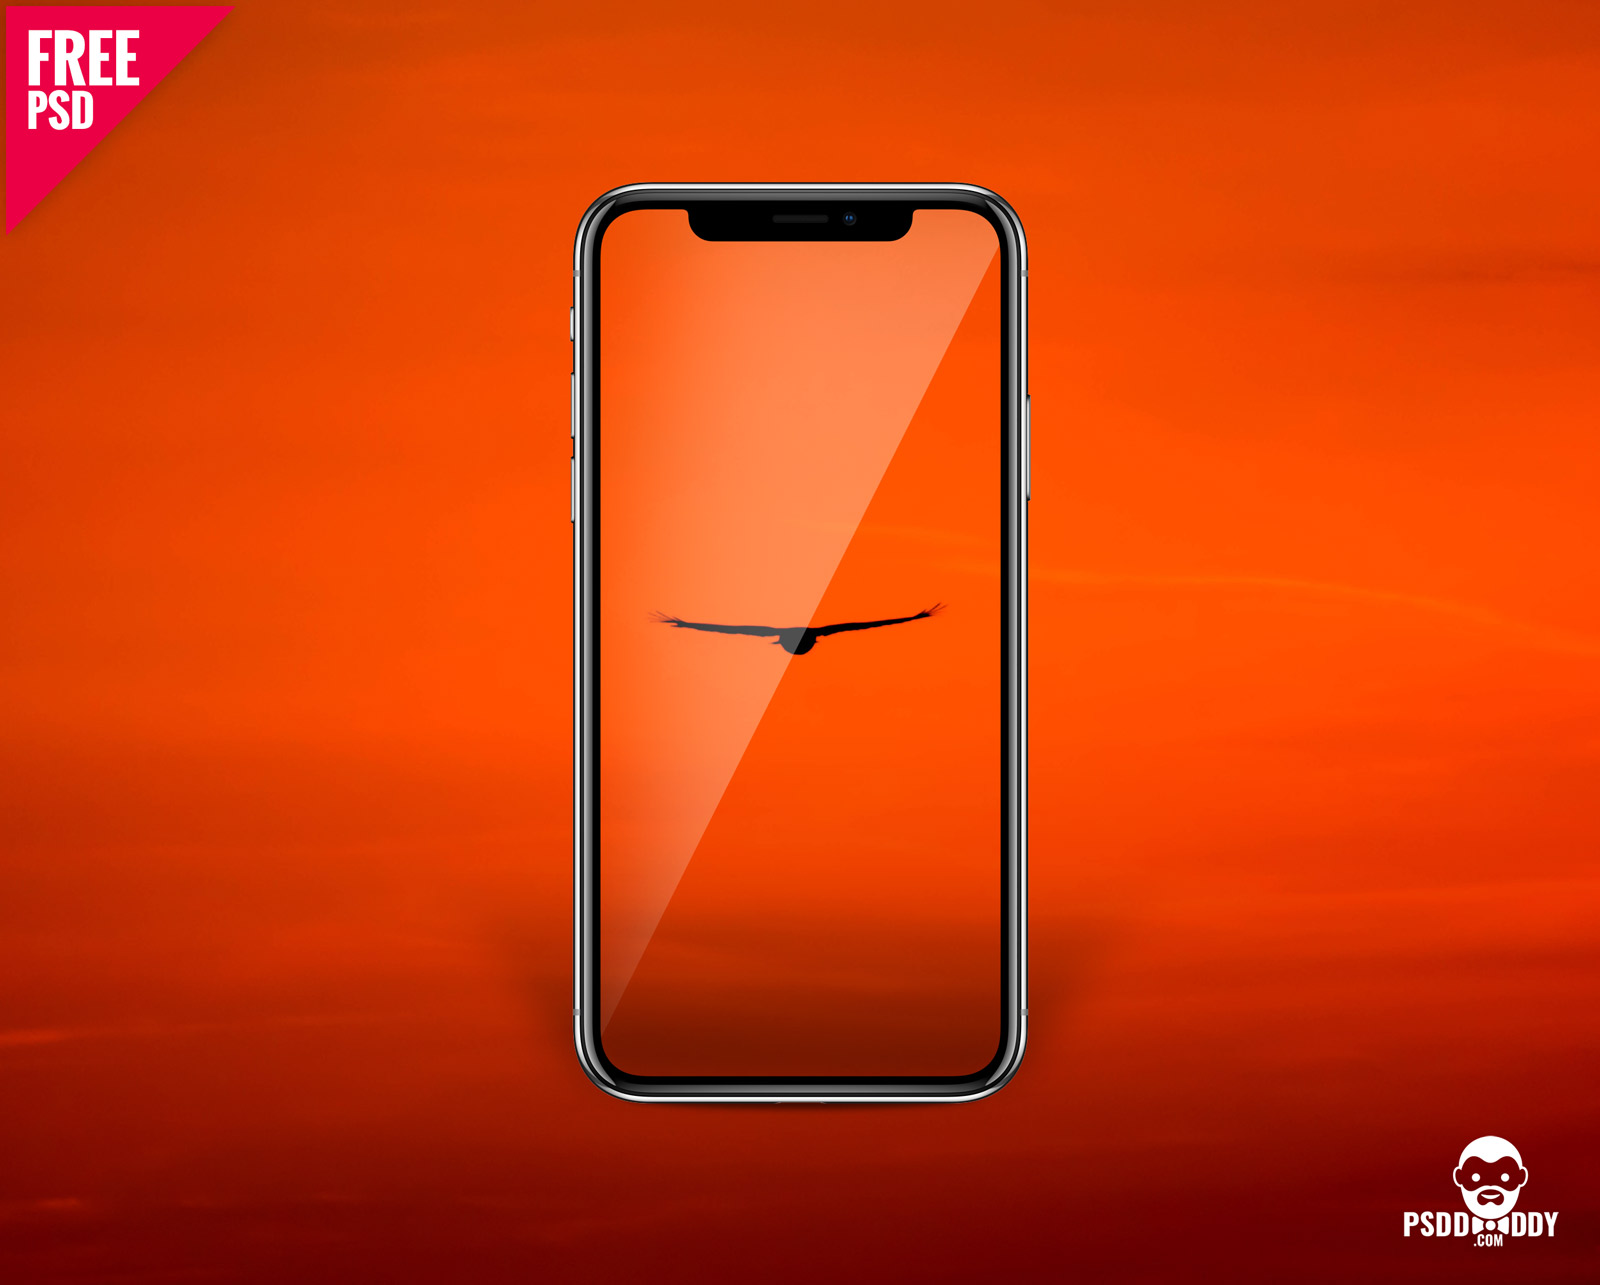 Download 25+ Stylish iPhone X PSD Mockups Free to showcase your ...